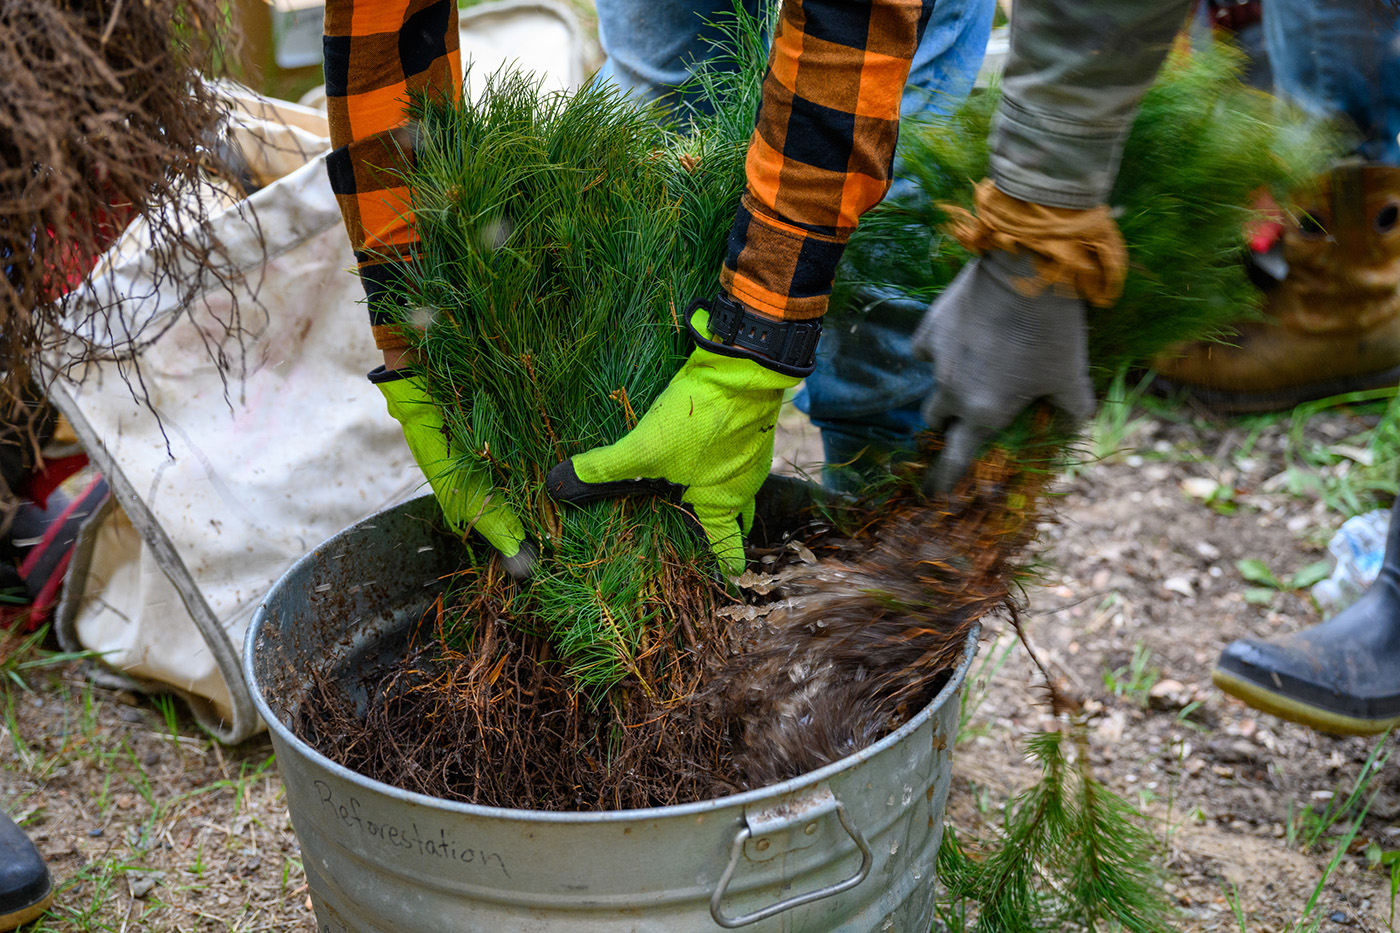 A person places tree seedlings into a metal bucket.